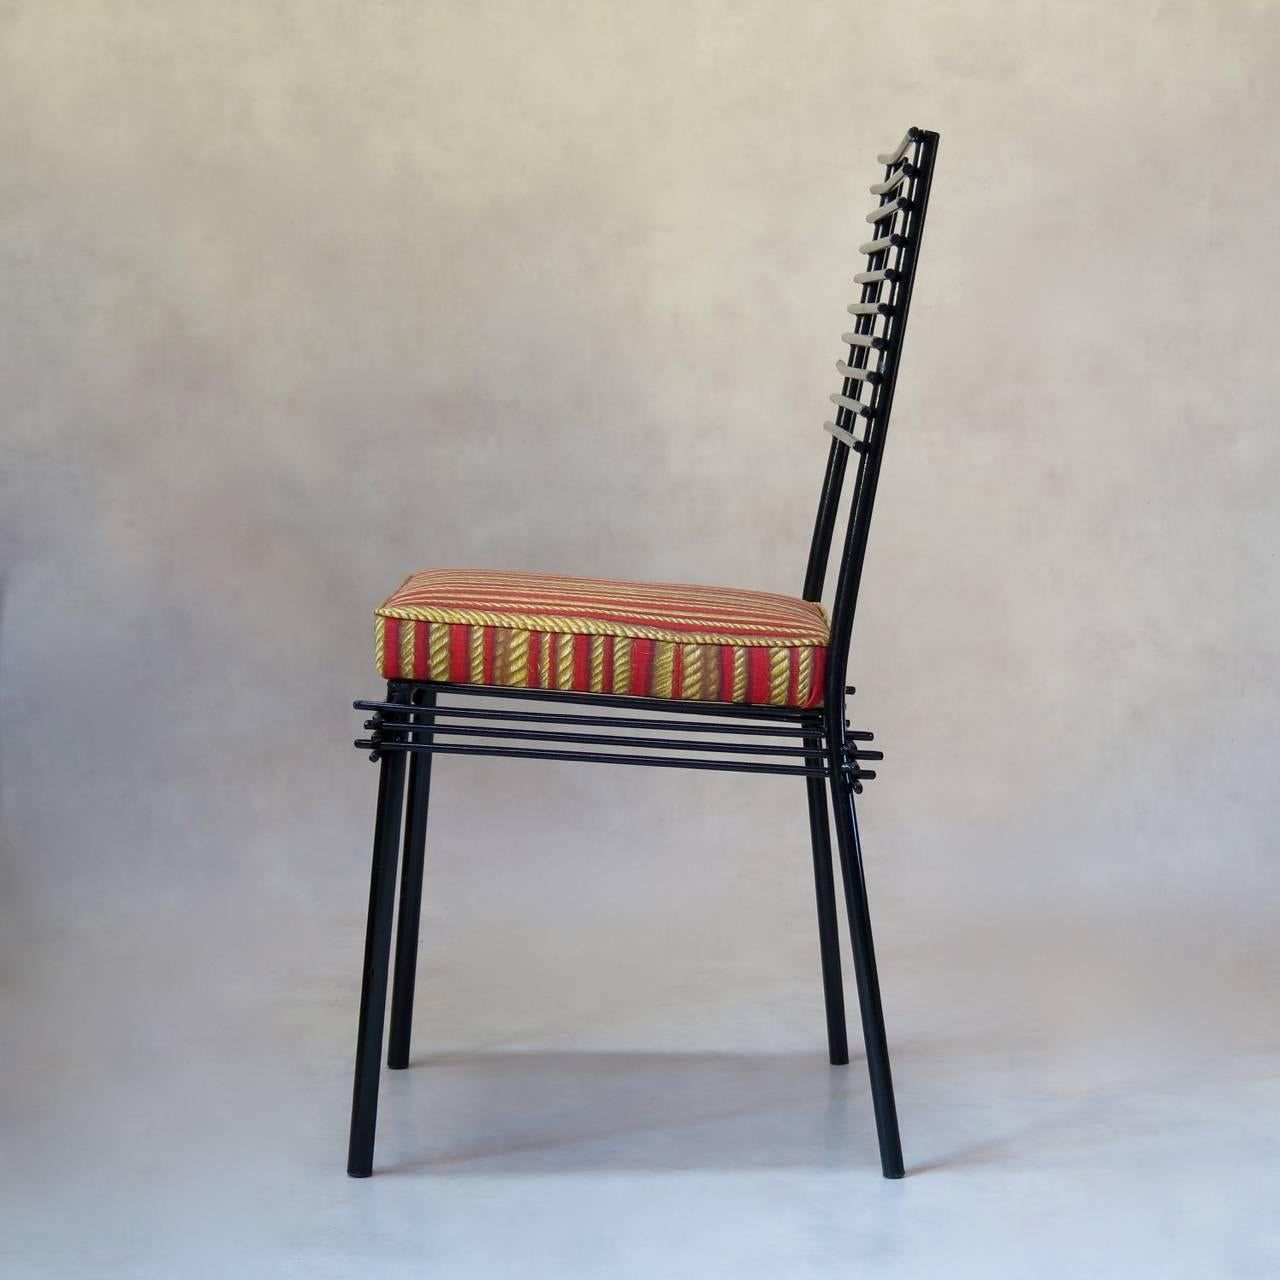 Chic and understated set of four dining chairs with a simple iron structure, painted black. The backs feature a simple design of thin horizontal rods. This motif is repeated around the aprons.

The seats have been newly re-upholstered with new,